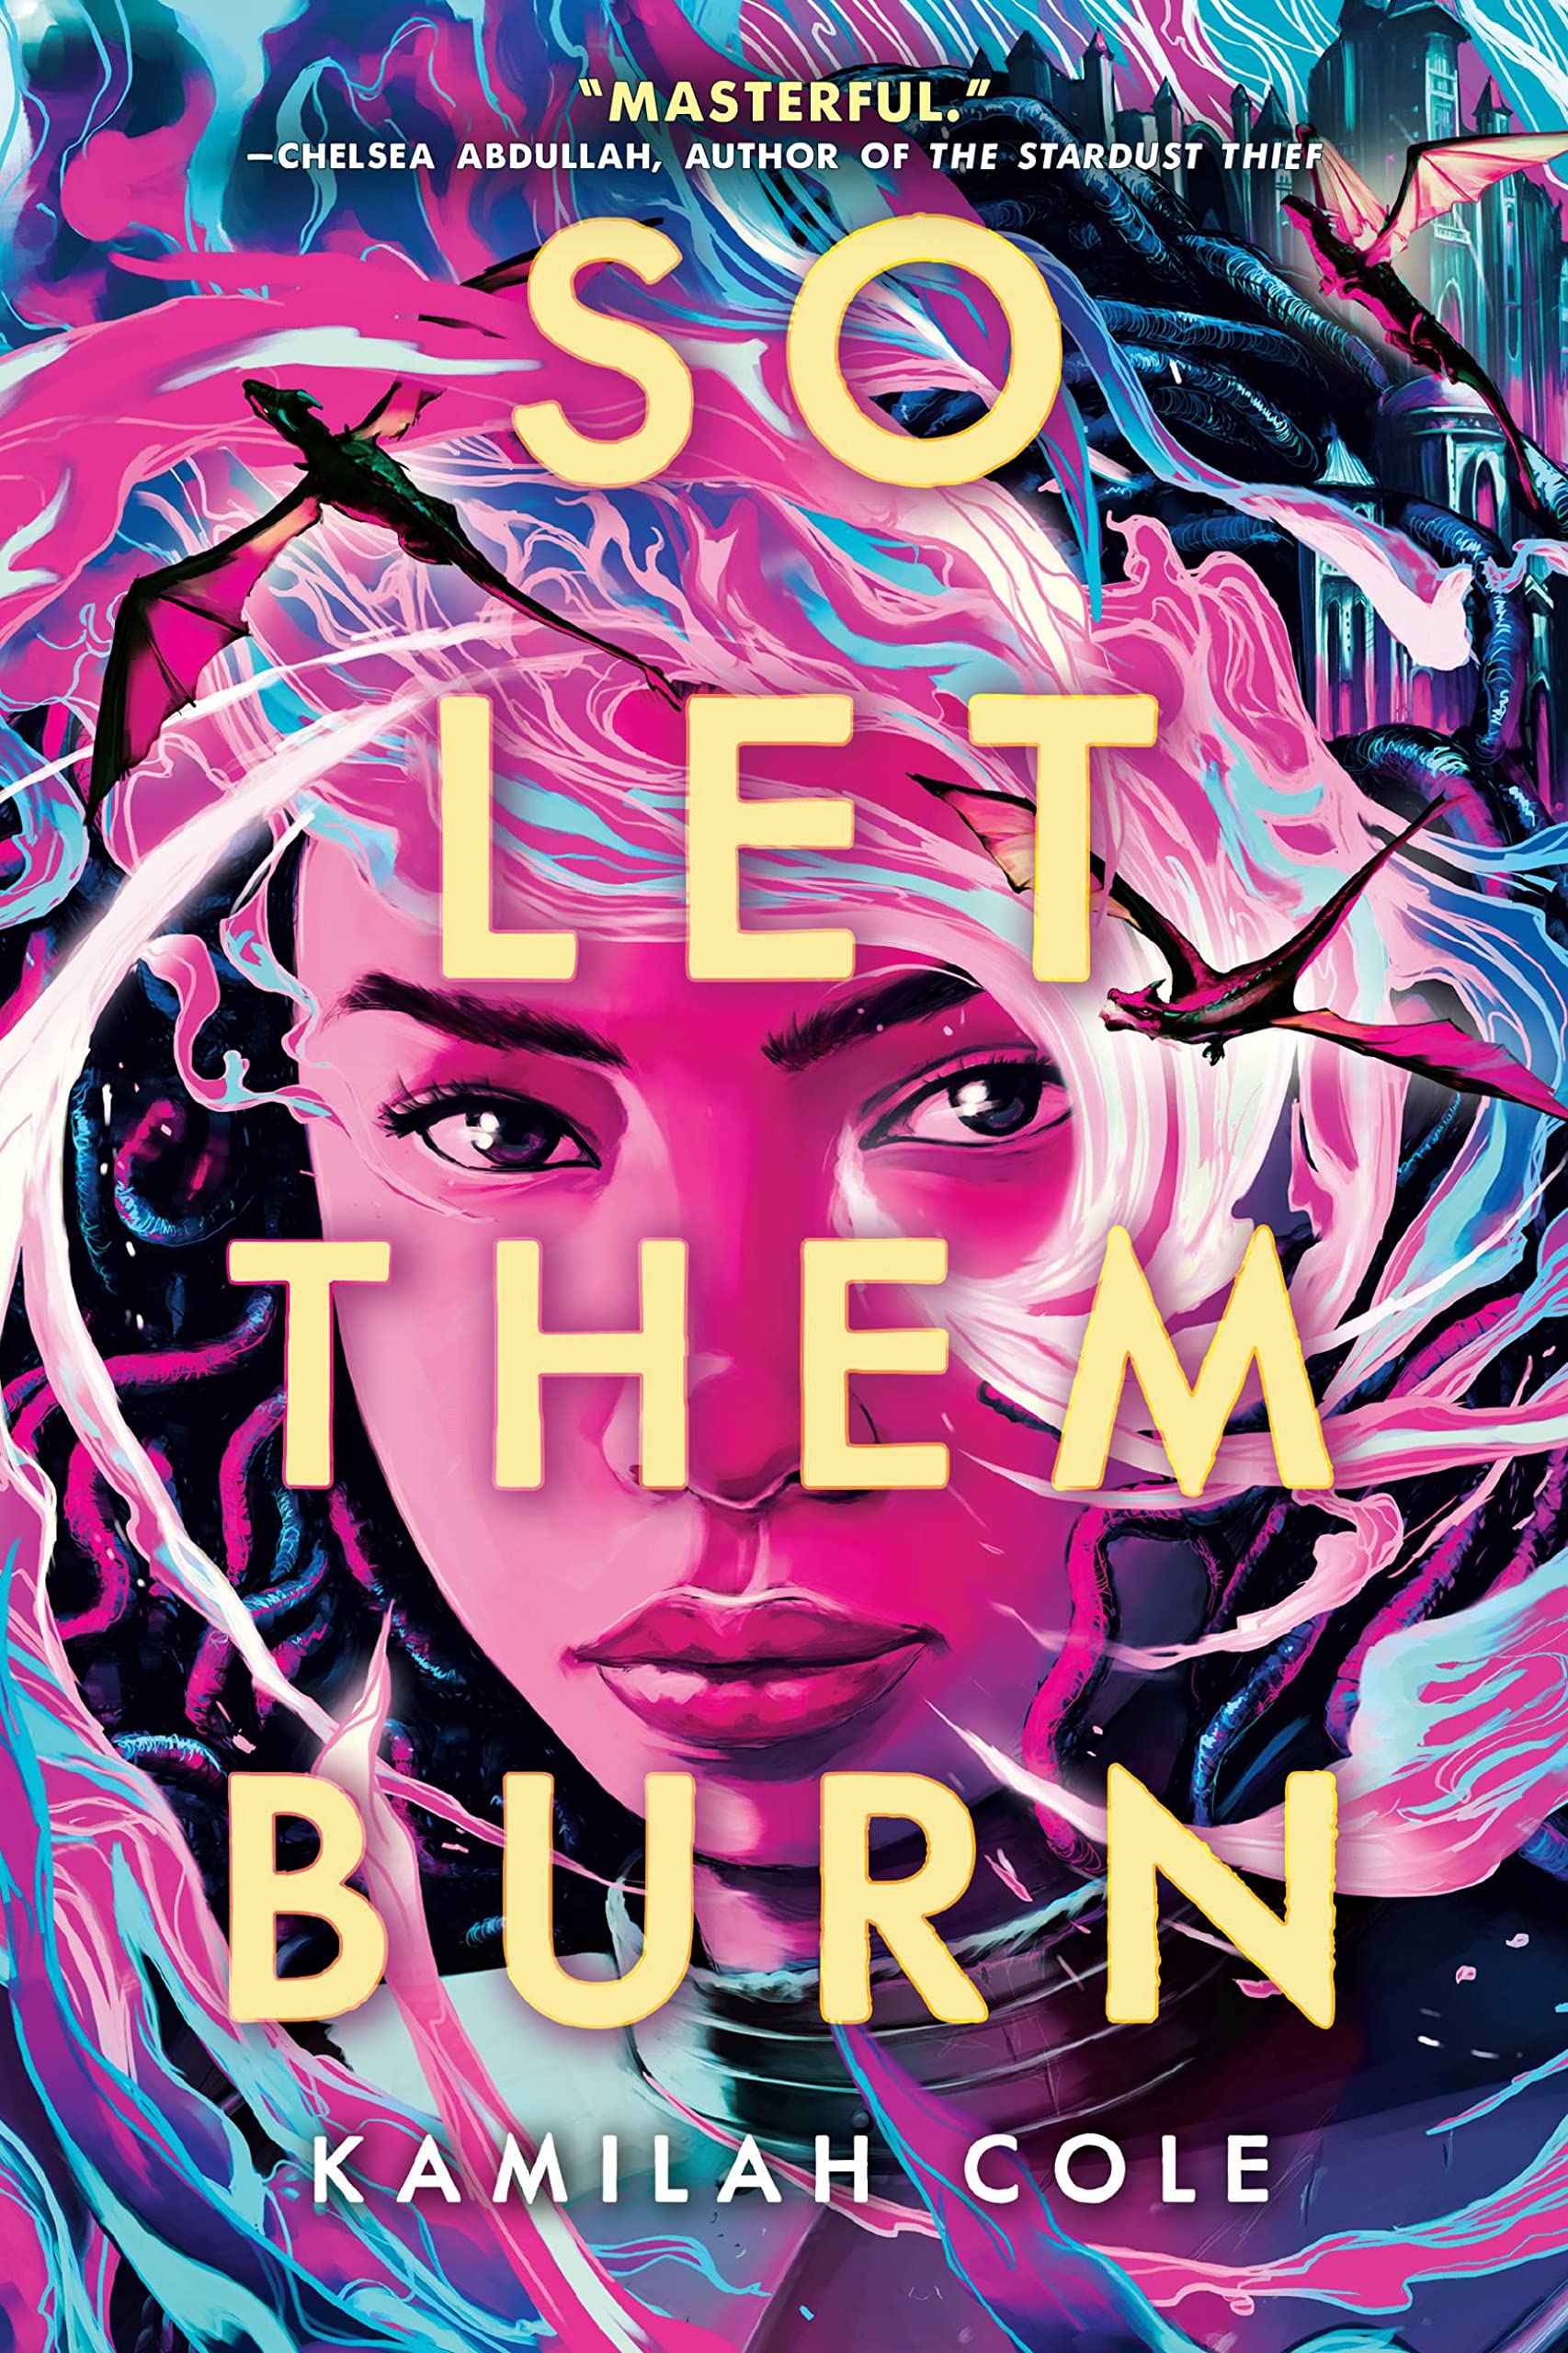 So Let Them Burn by Kamiliah Cole | Book Review